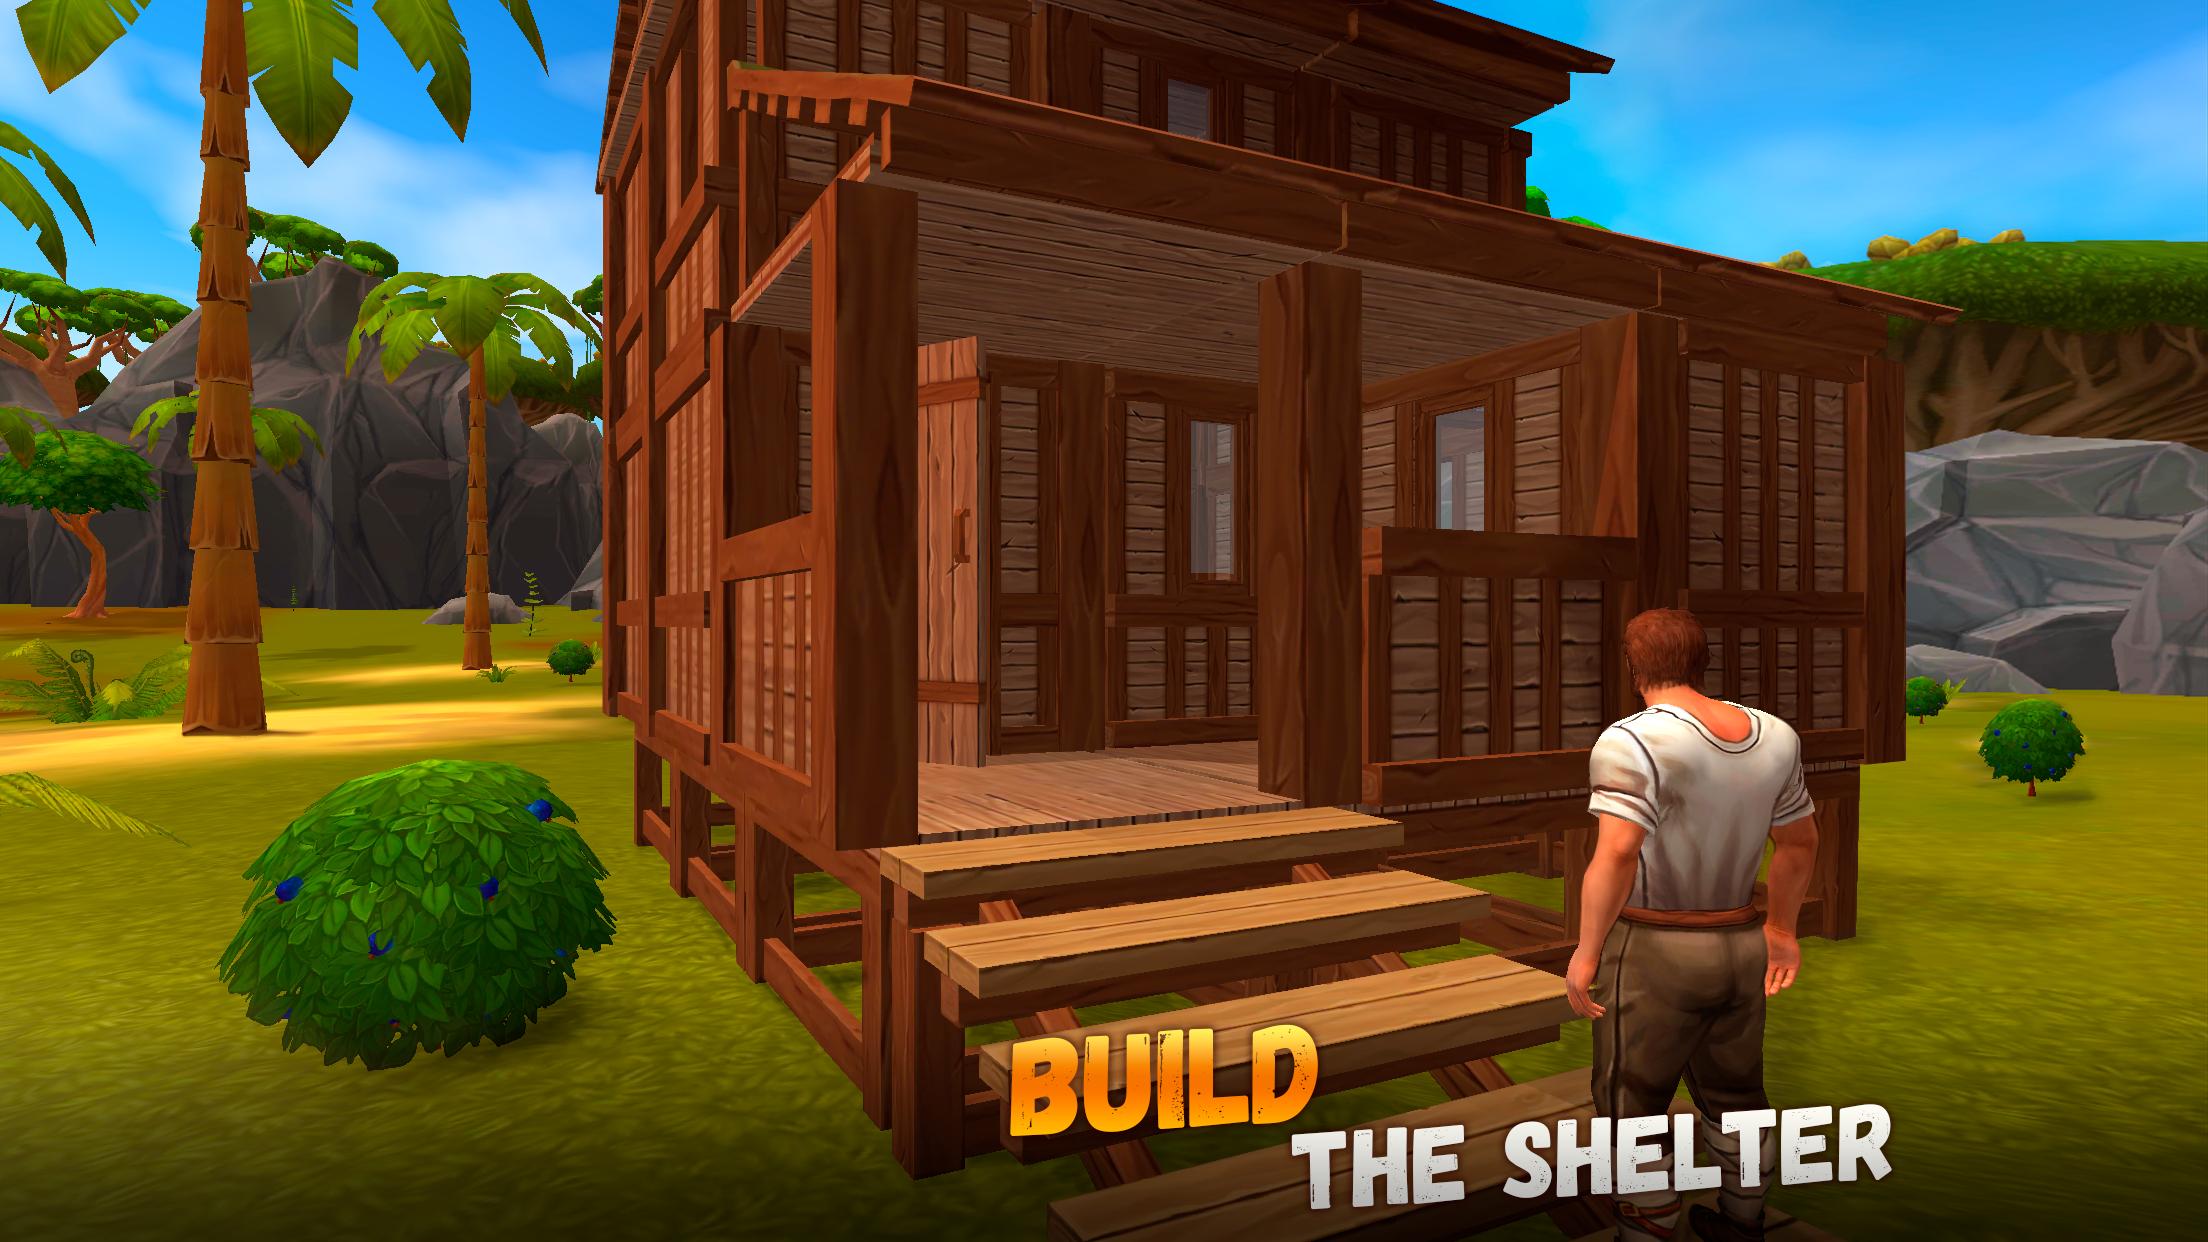 Survival Island 2: Dinosaurs & Craft for Android - APK ...
